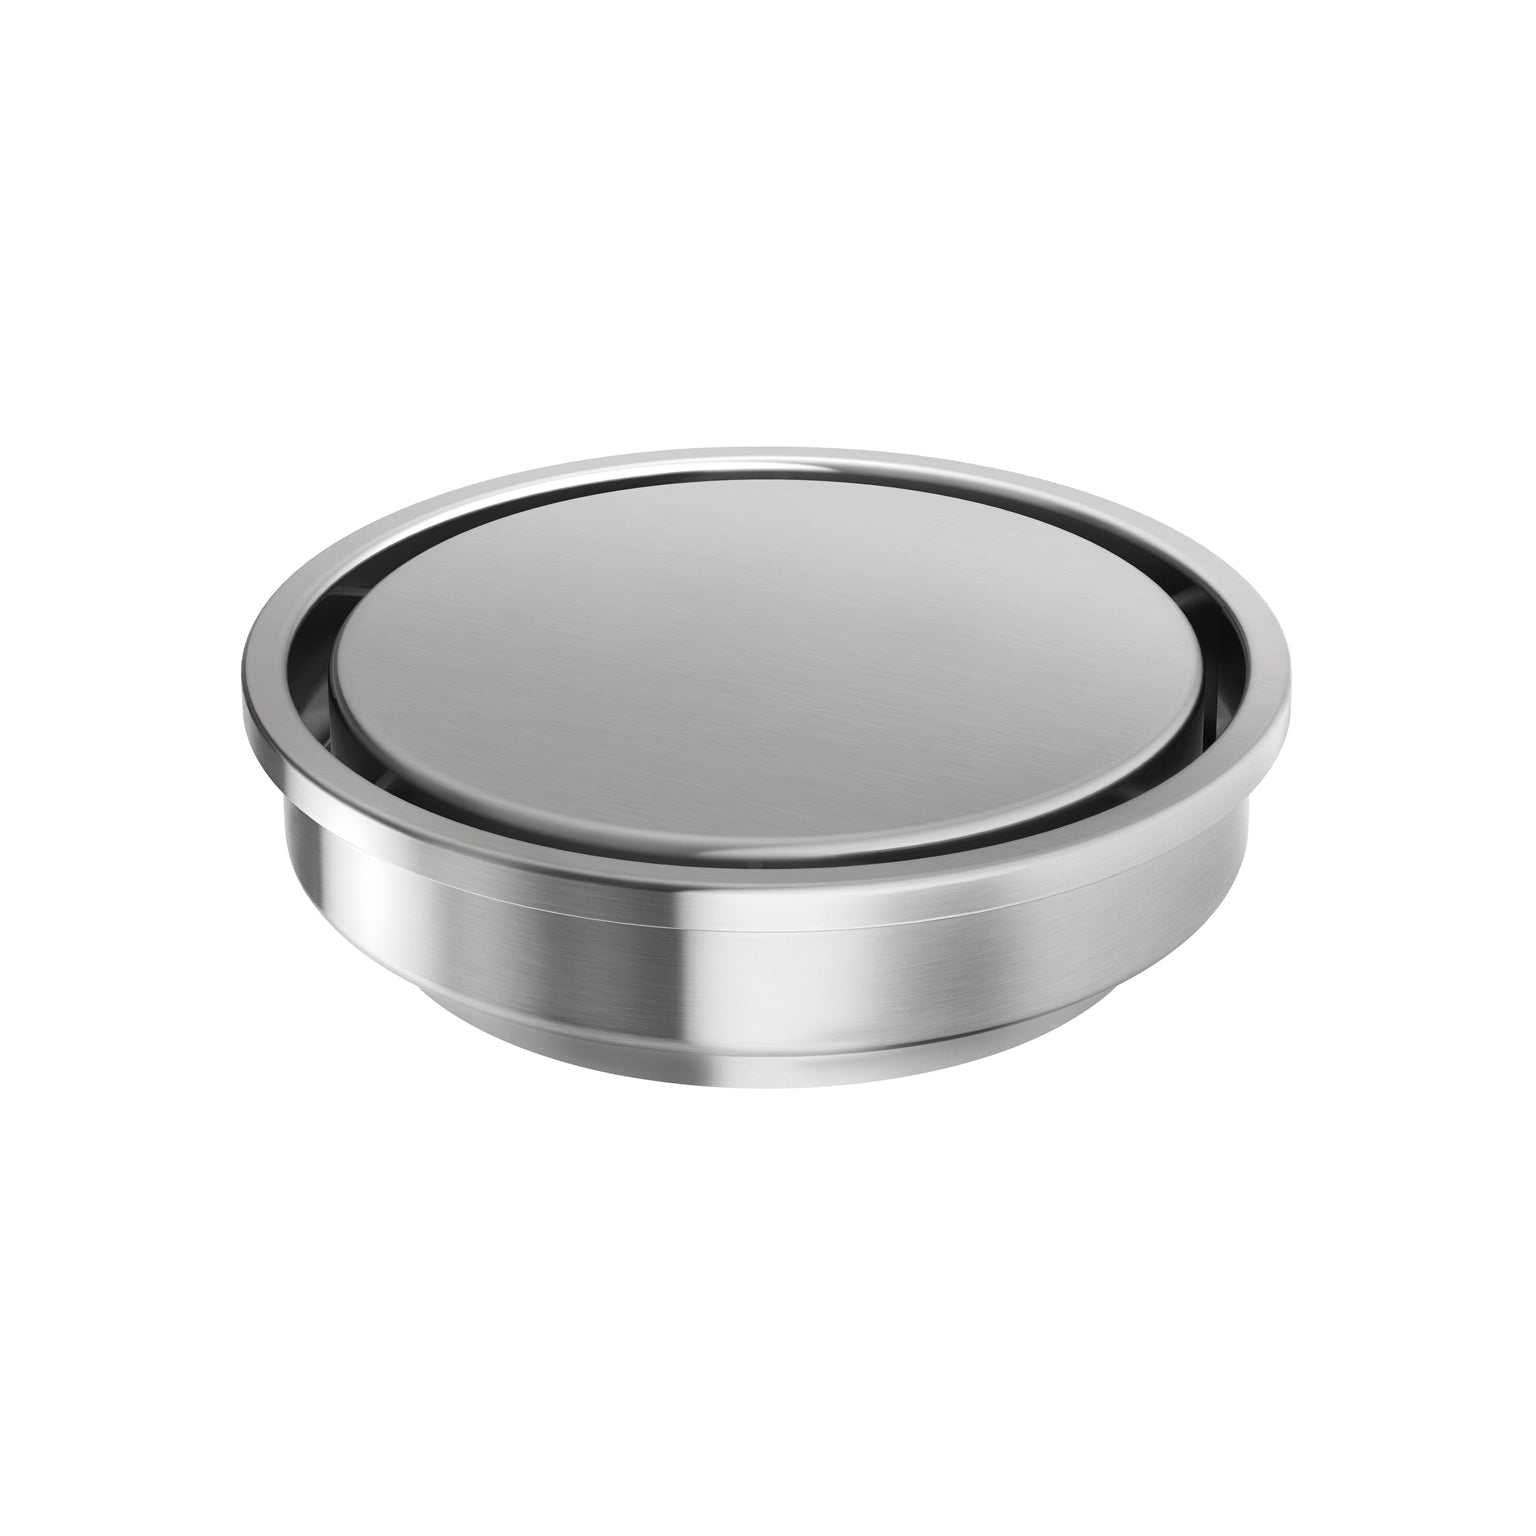 PHOENIX POINT DRAIN ROUND 76MM OUTLET STAINLESS STEEL AND BLACK 100MM